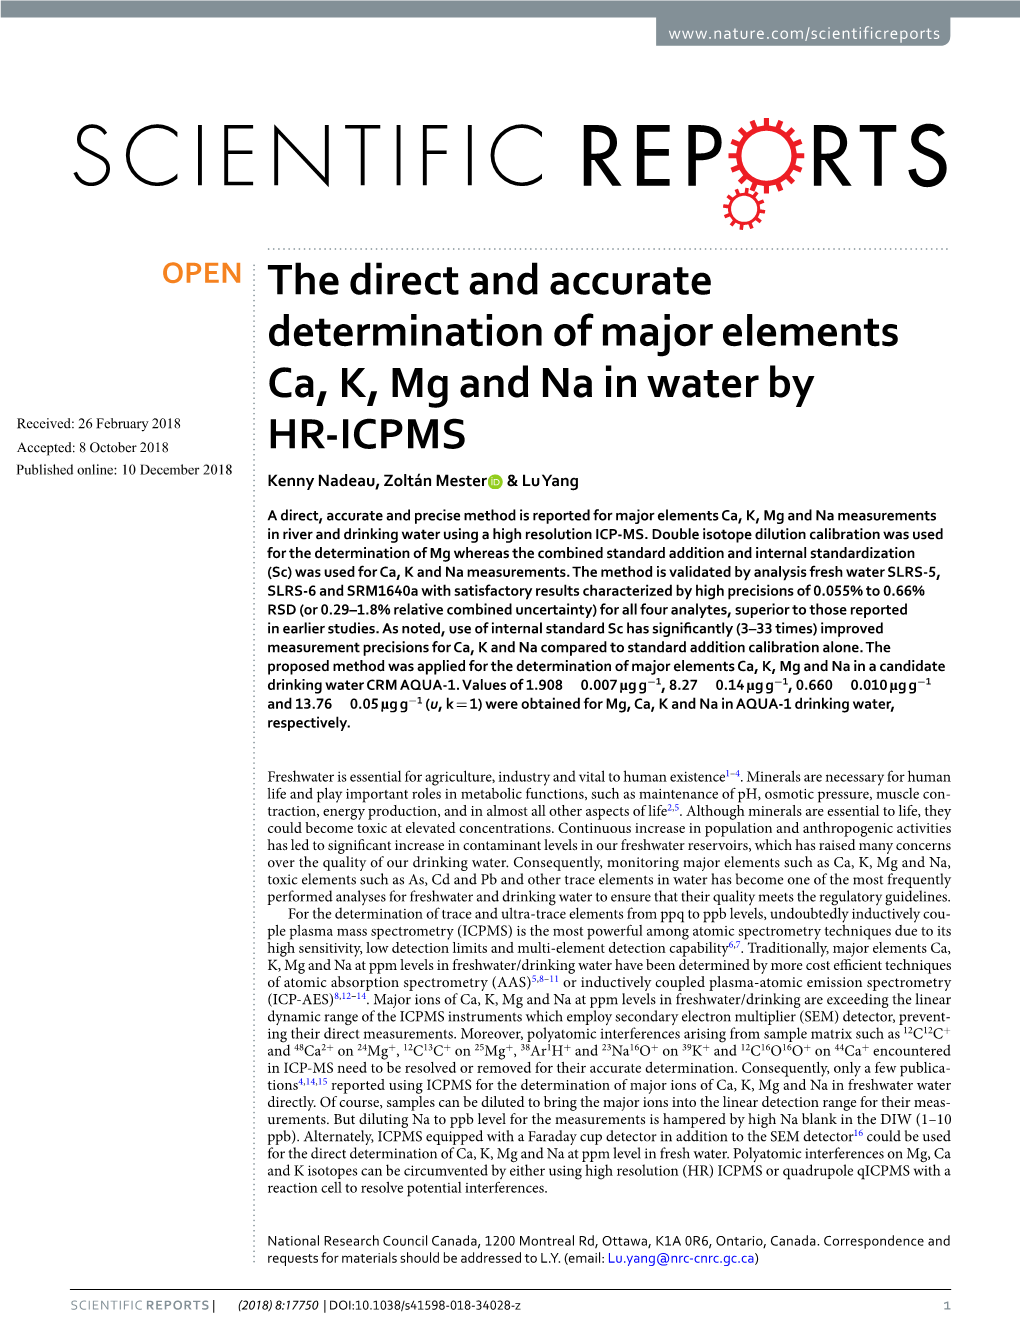 The Direct and Accurate Determination of Major Elements Ca, K, Mg And